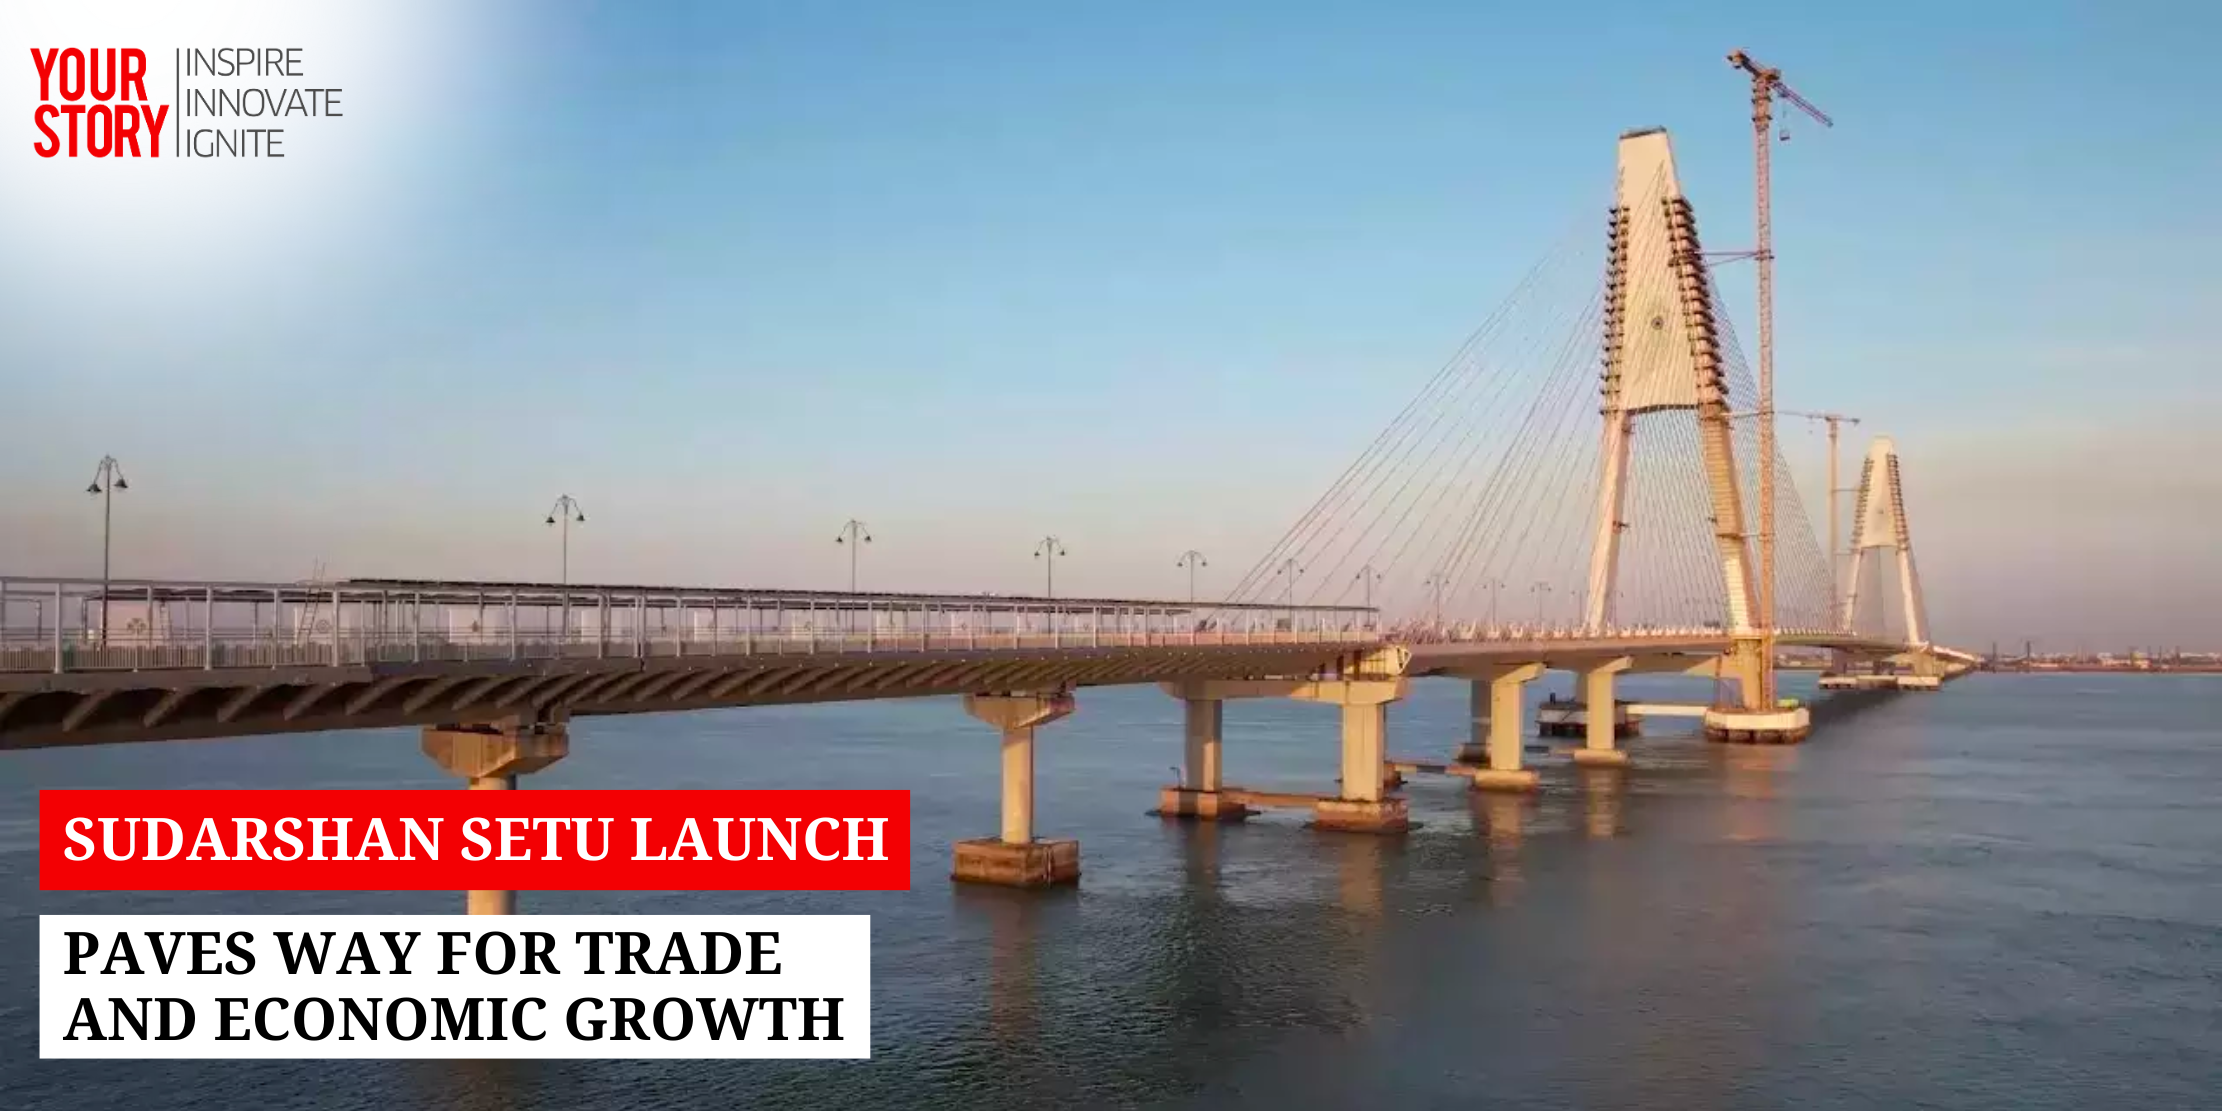 Sudarshan Setu Launch Paves Way for Trade and Economic Growth